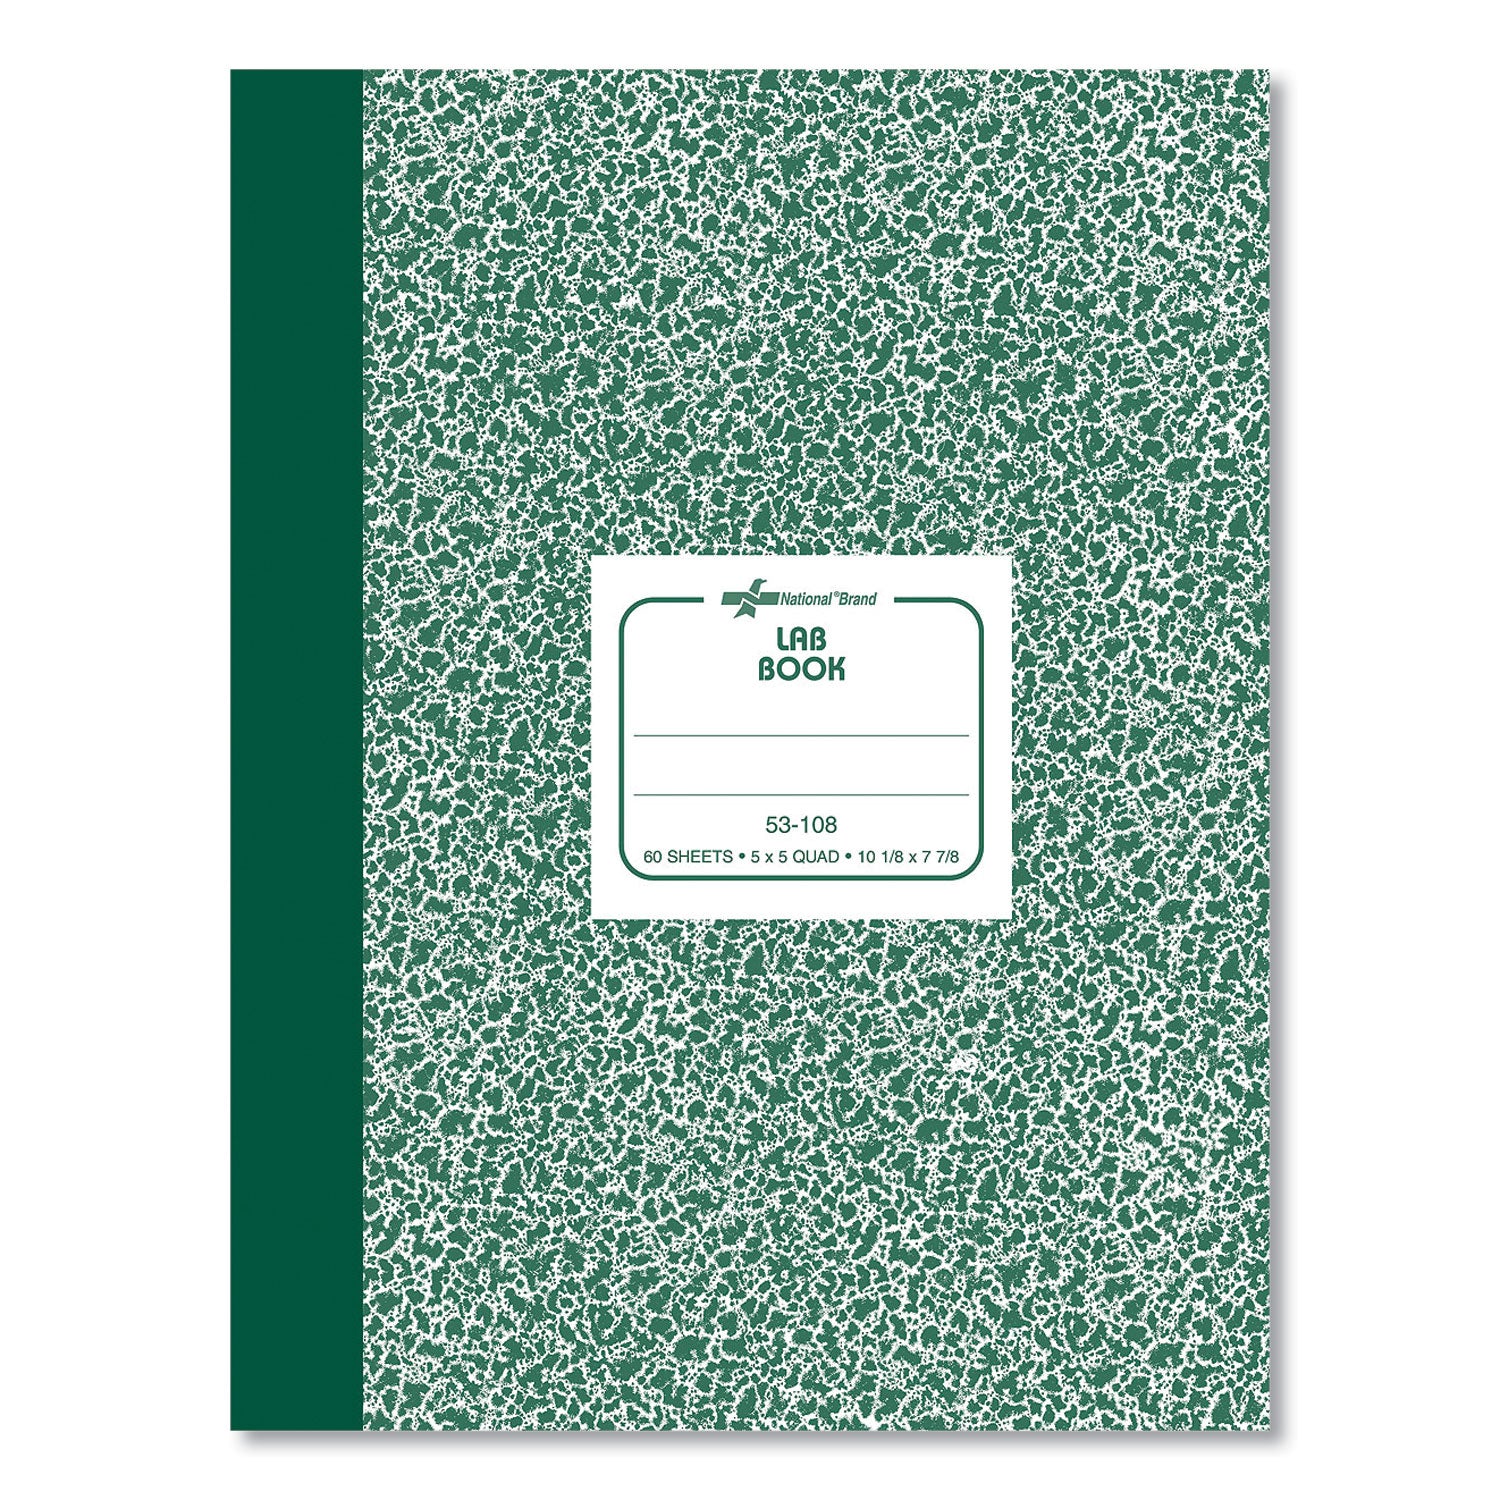 Composition Lab Notebook, Quadrille Rule, Green Cover, (60) 10.13 x 7.88 Sheets - 